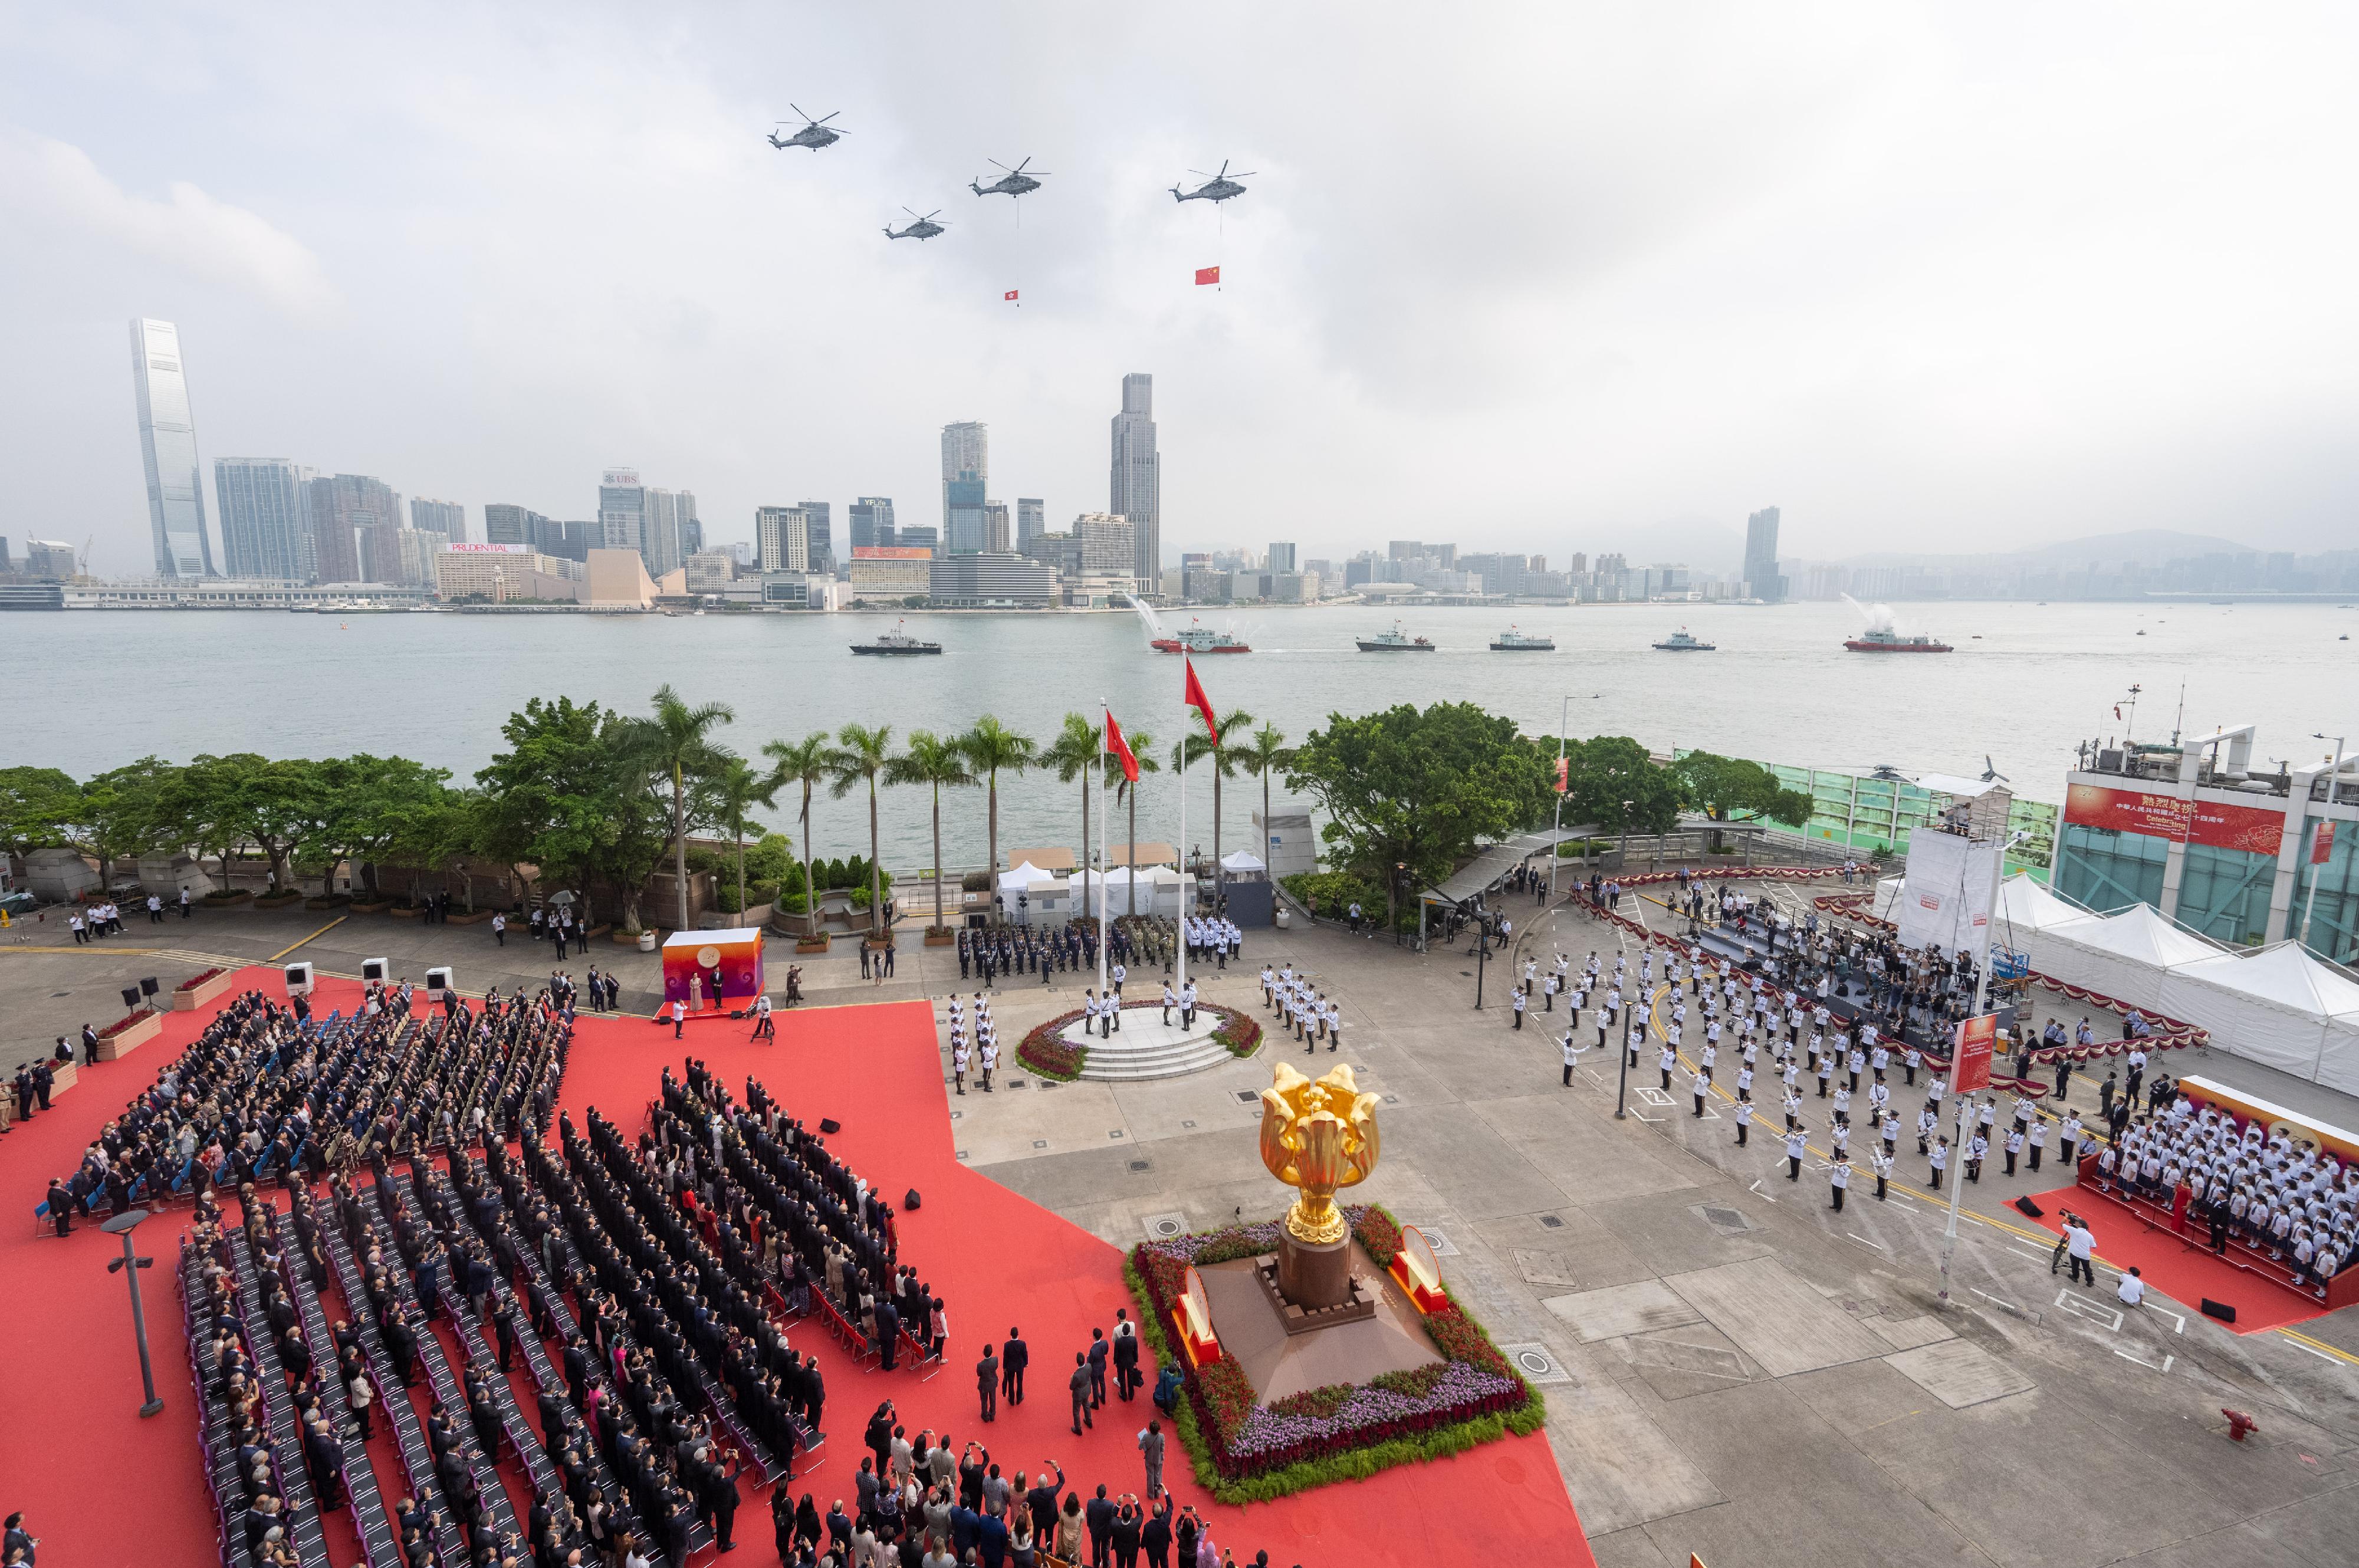 The disciplined services and the Government Flying Service perform a sea parade and a fly-past to mark the 74th anniversary of the founding of the People's Republic of China at the flag-raising ceremony at Golden Bauhinia Square in Wan Chai this morning (October 1).